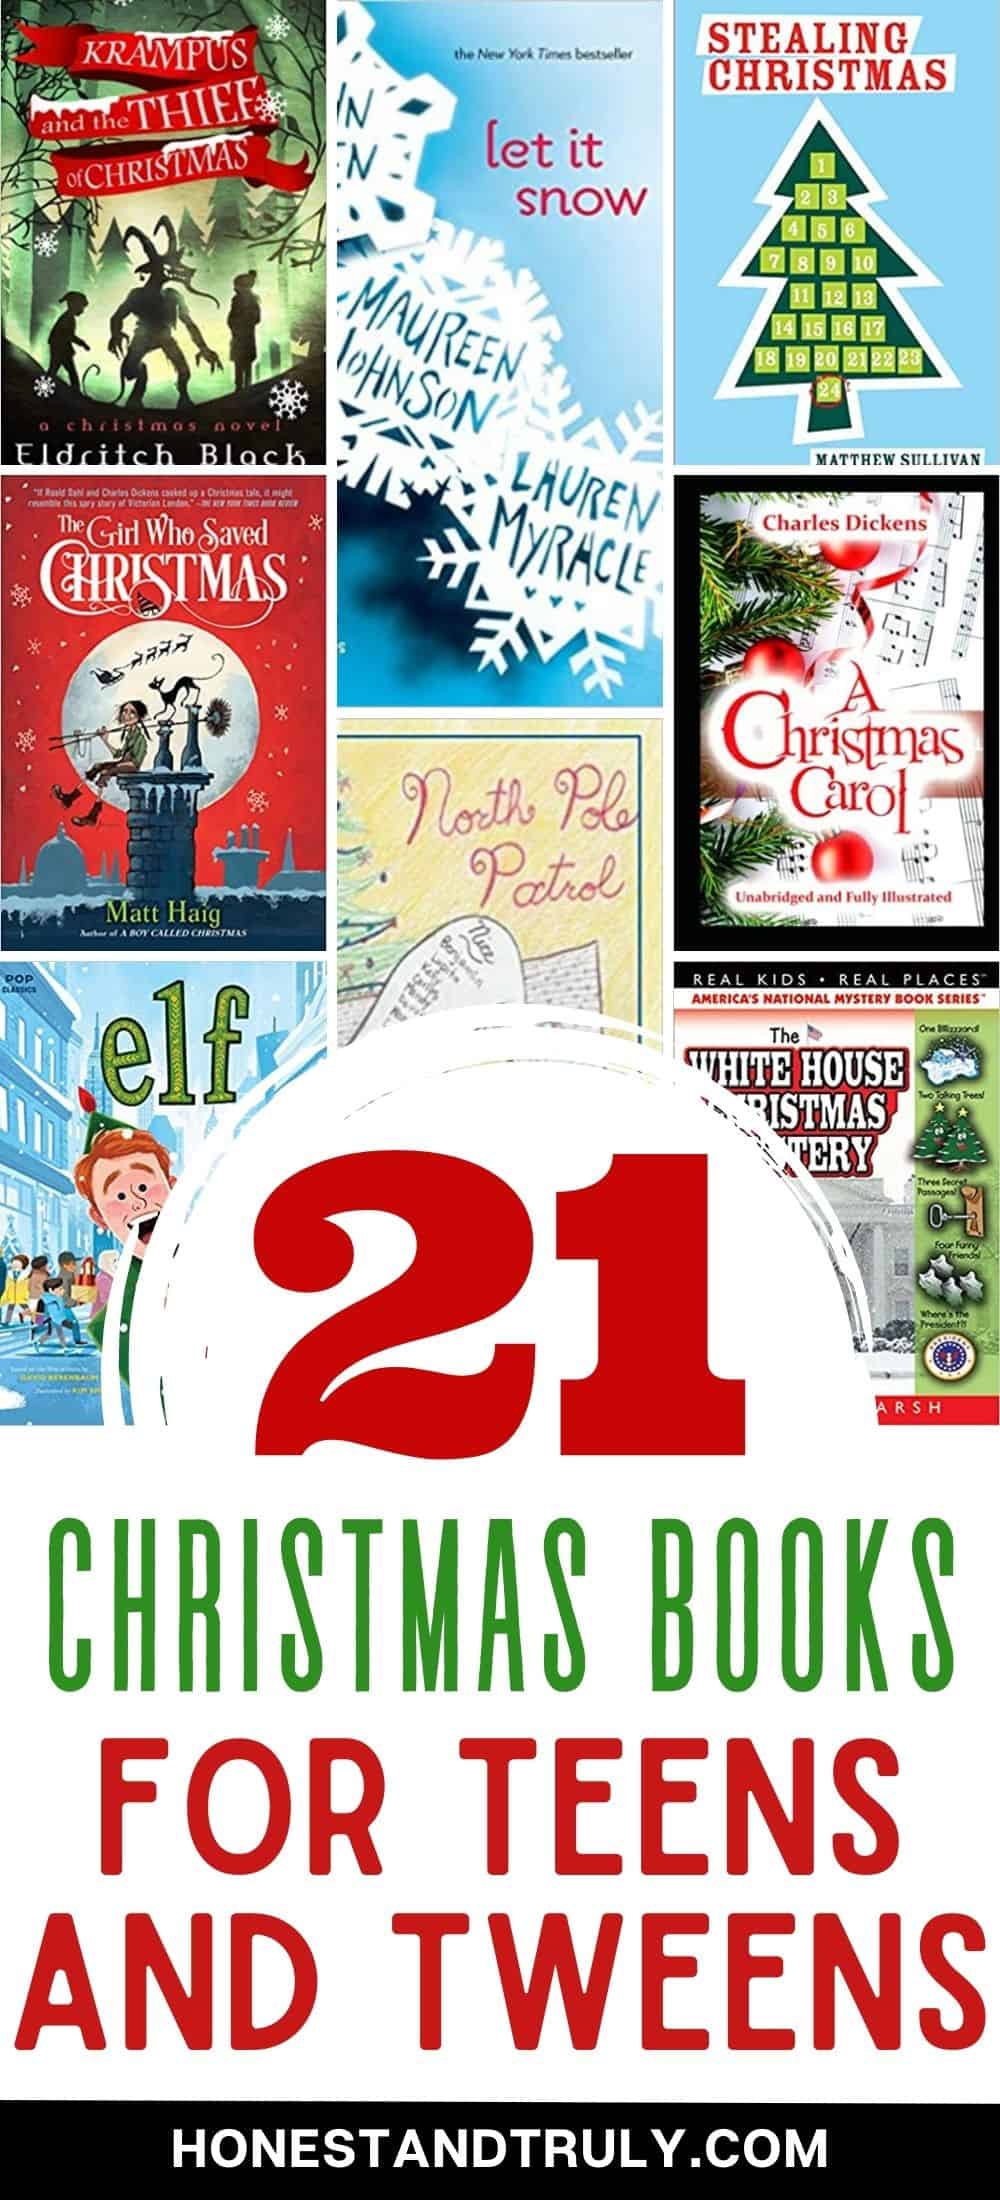 Collage of 7 Christmas Book covers with text 21 Christmas books for tweens and teens.